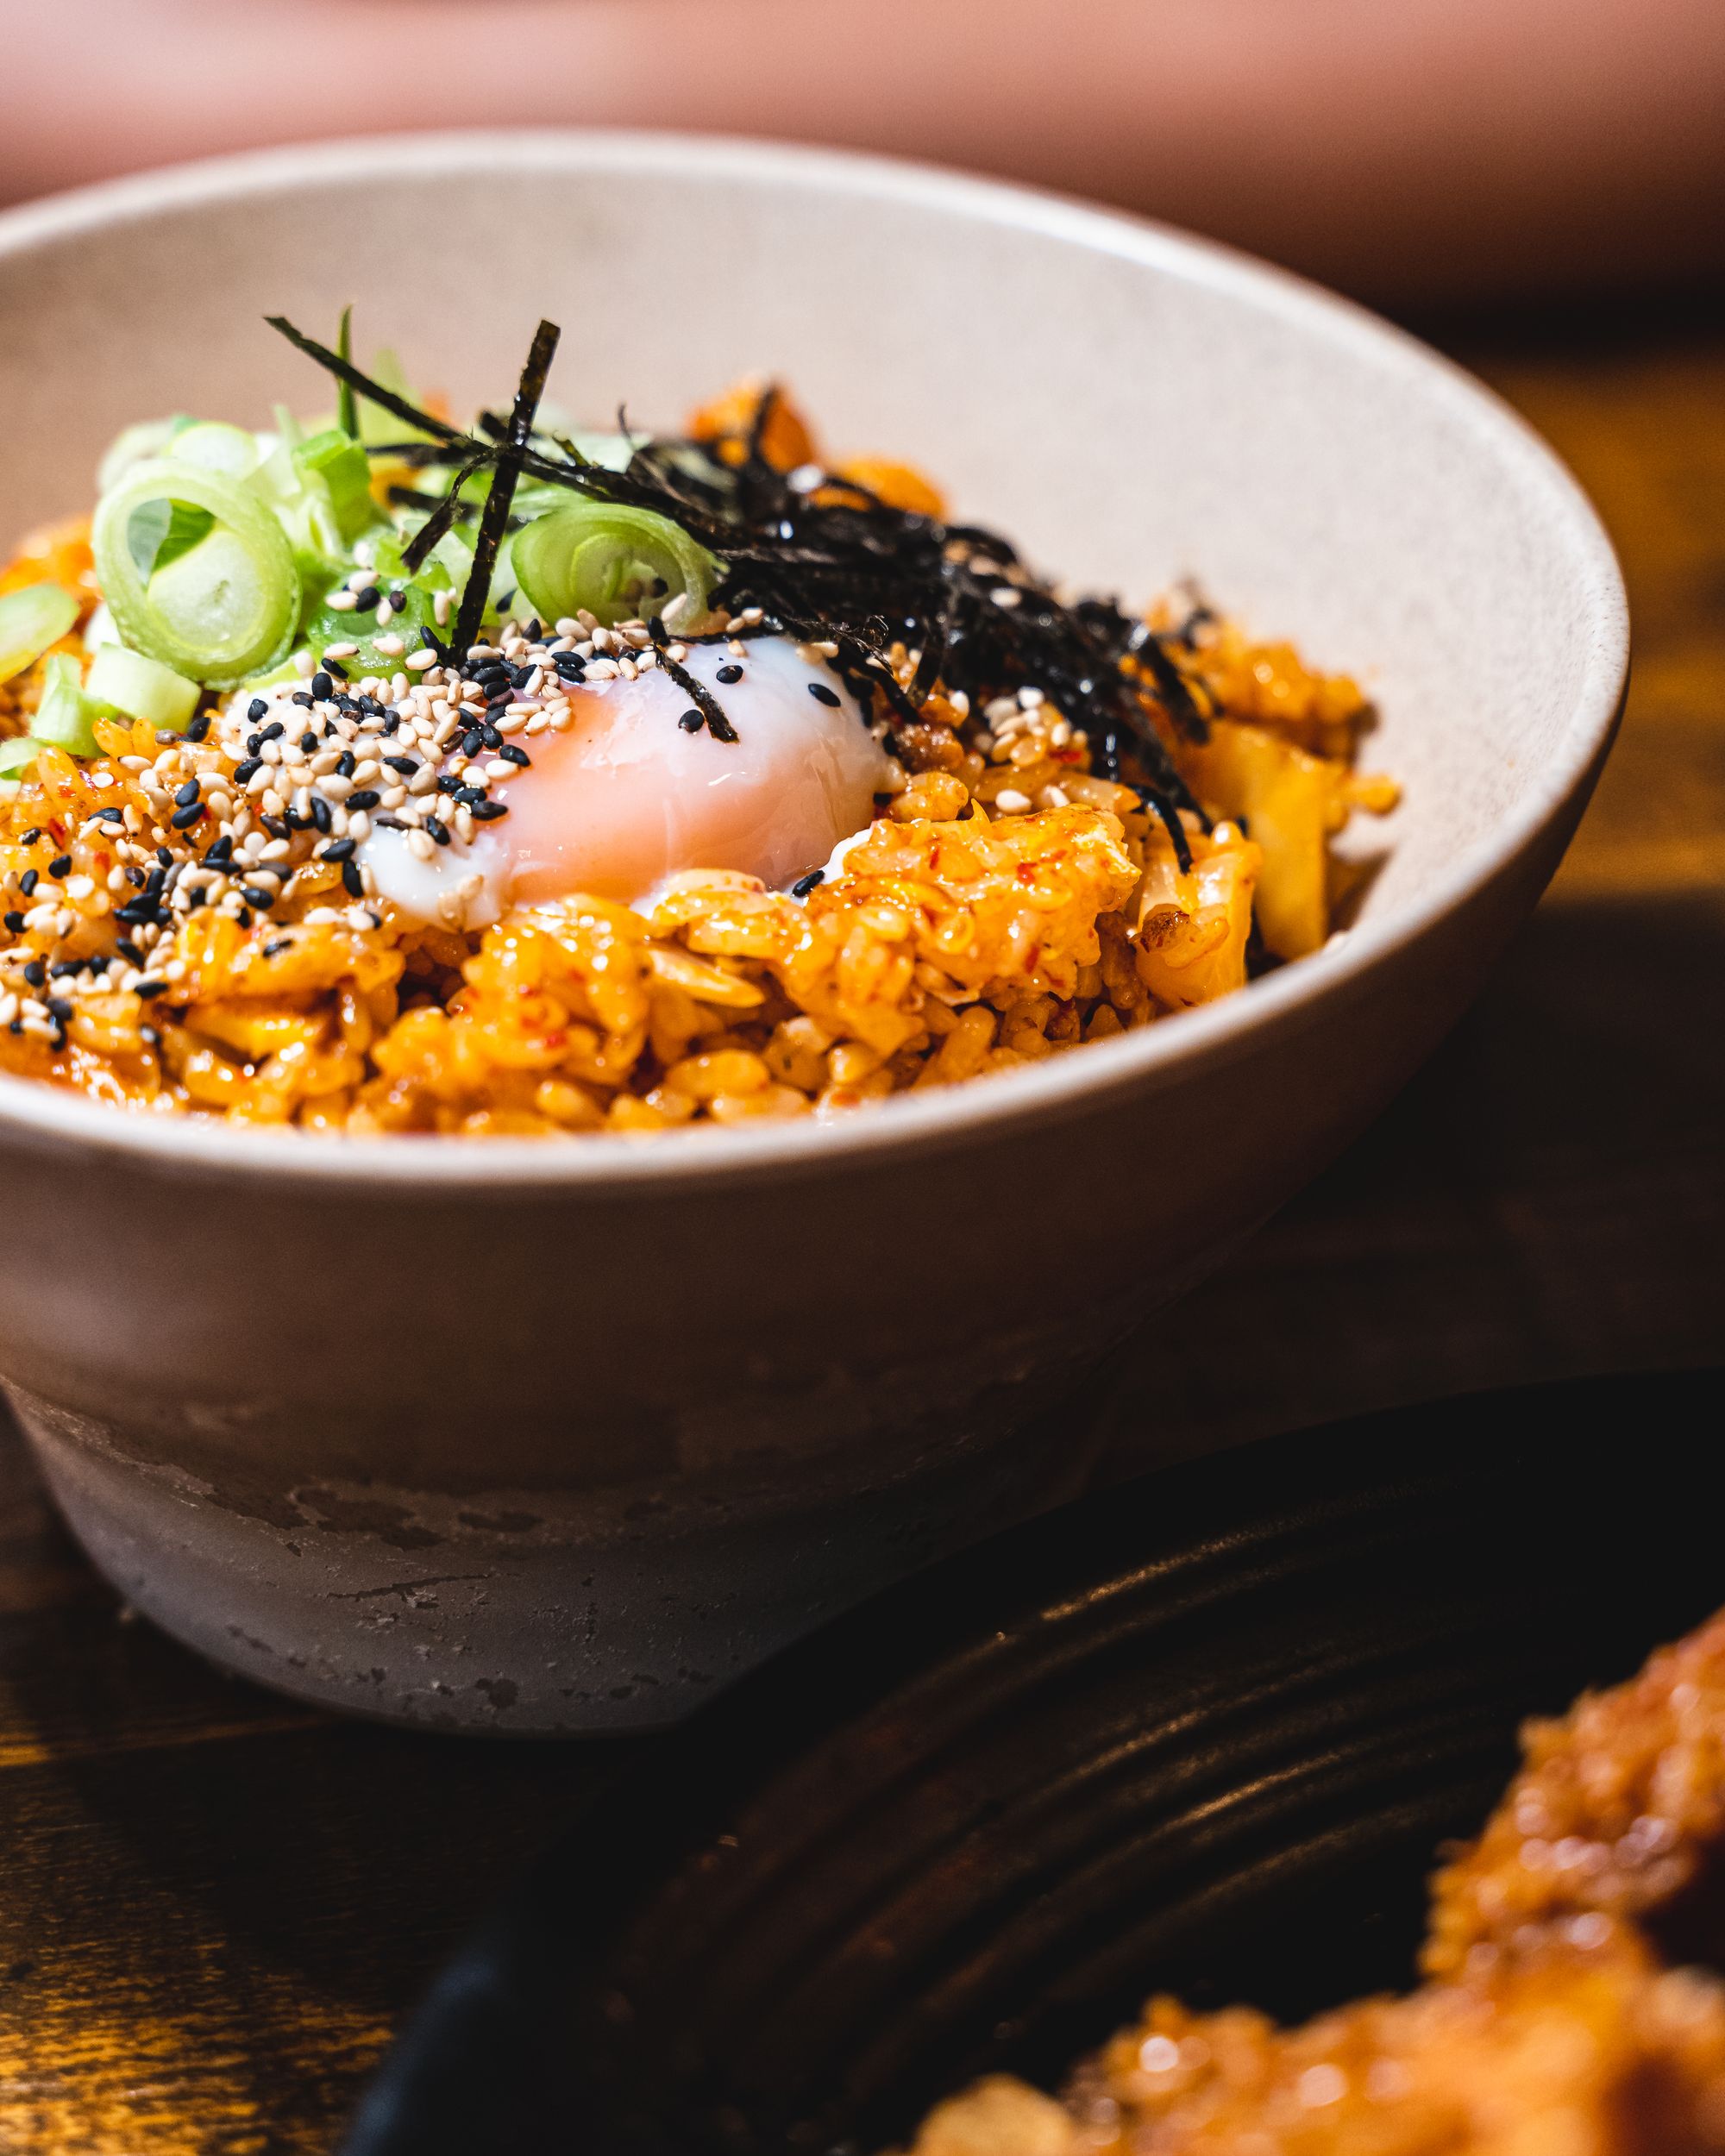 Overhead shot of kimchi fried rice, with a sous vide egg, seaweed and spring onion as garnish